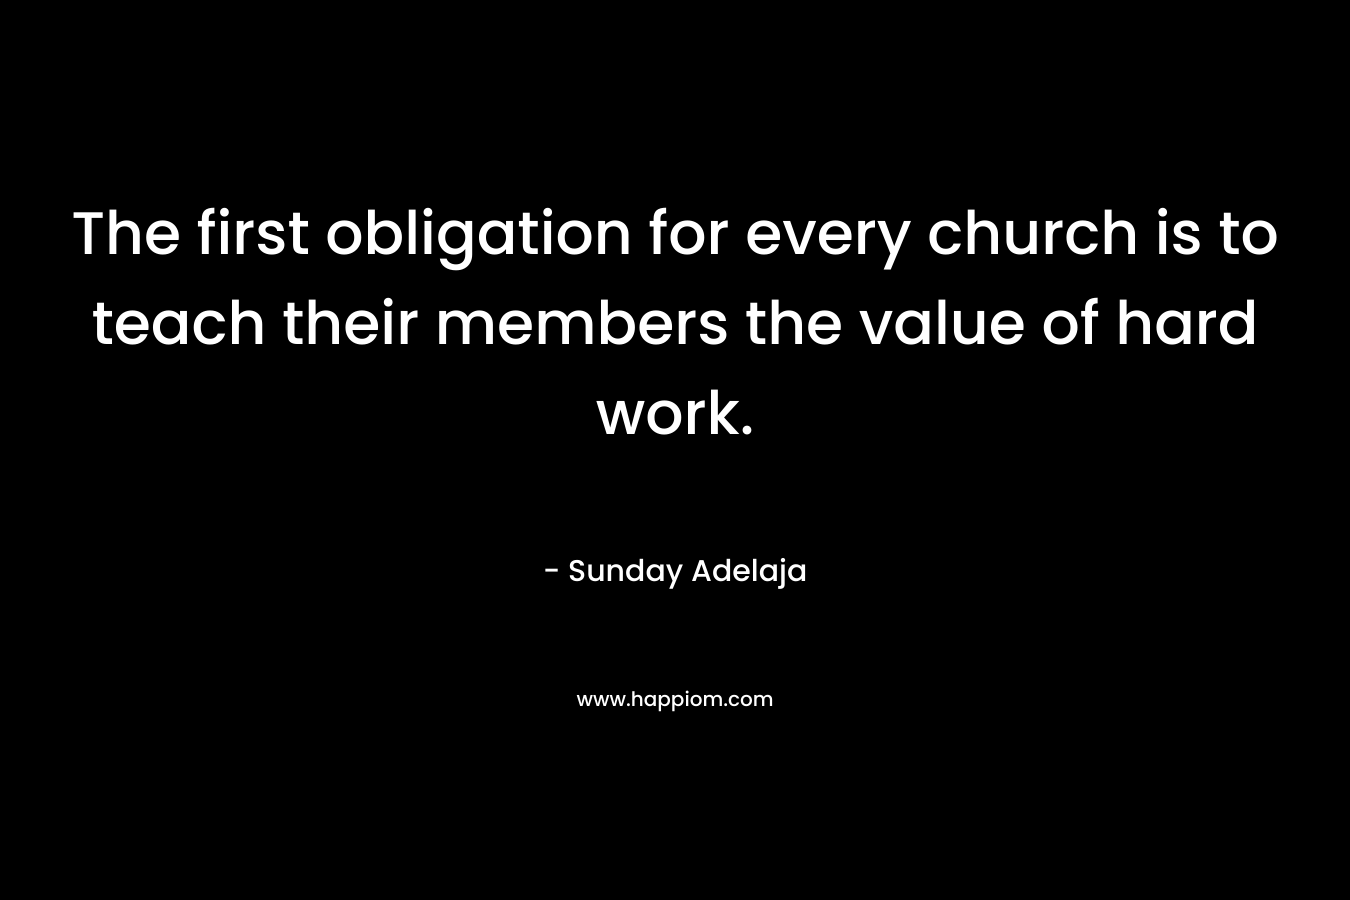 The first obligation for every church is to teach their members the value of hard work.